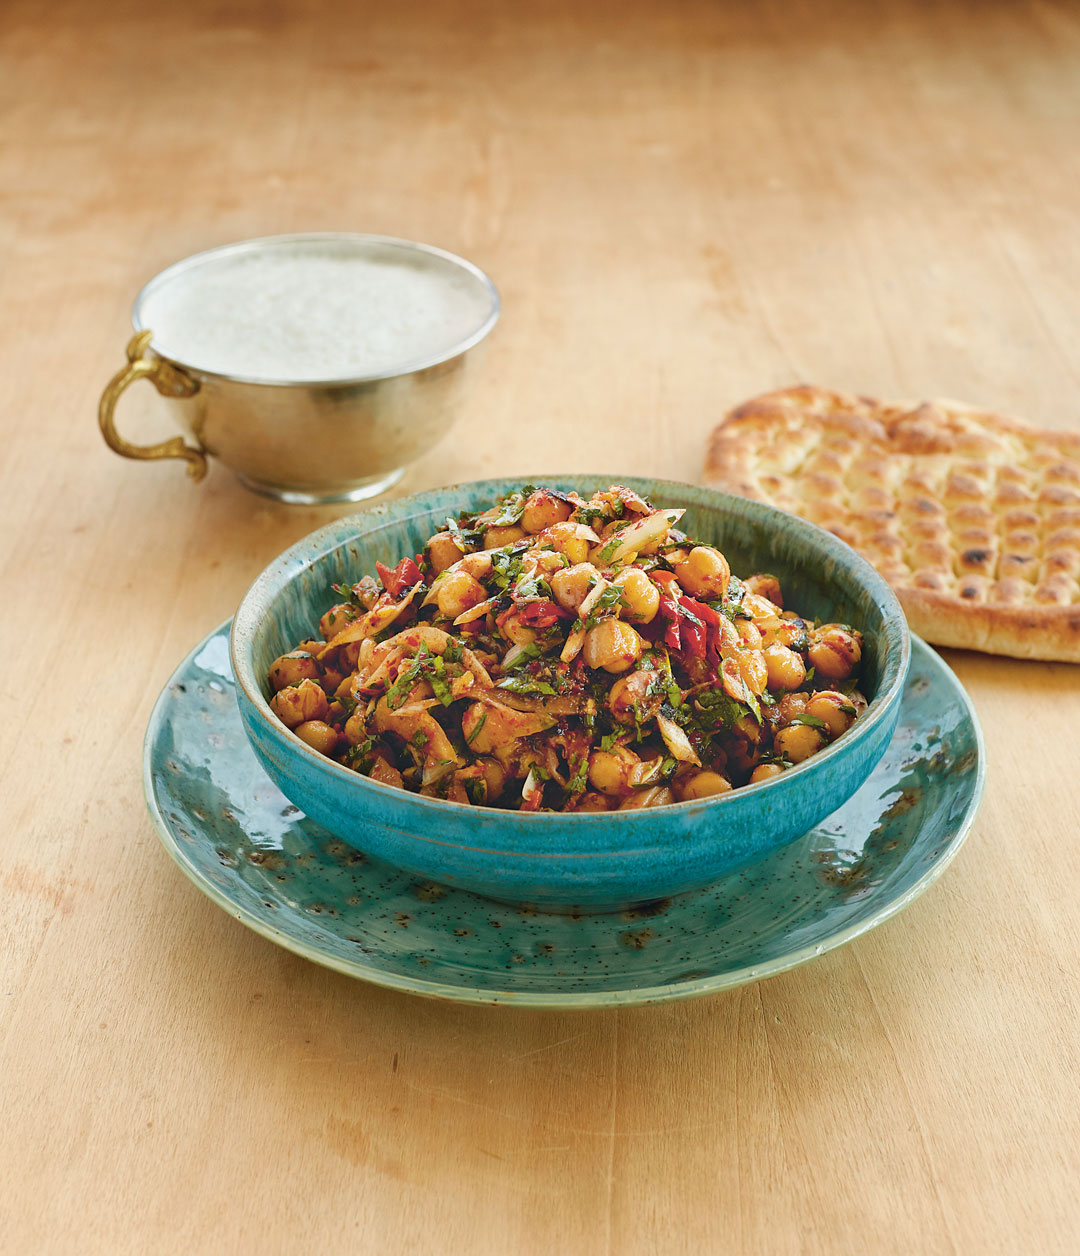 Chickpea salad, from The Turkish Cookbook